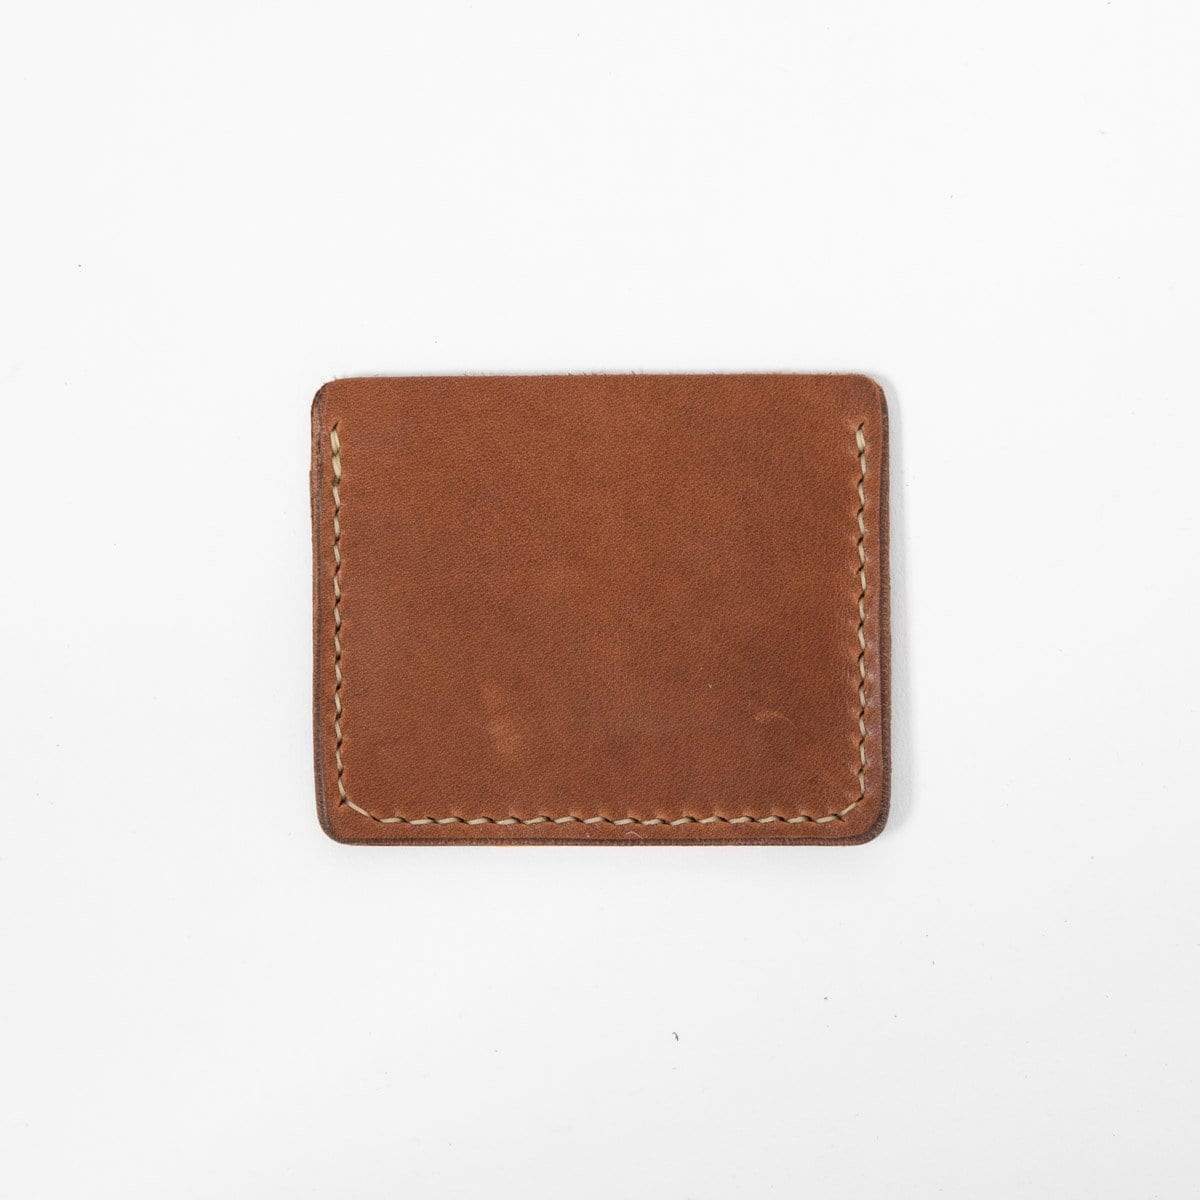 Grains & Tan Genuine Leather Card Wallet with Gift Box Small Leather Zipper  Card Holder Wallet